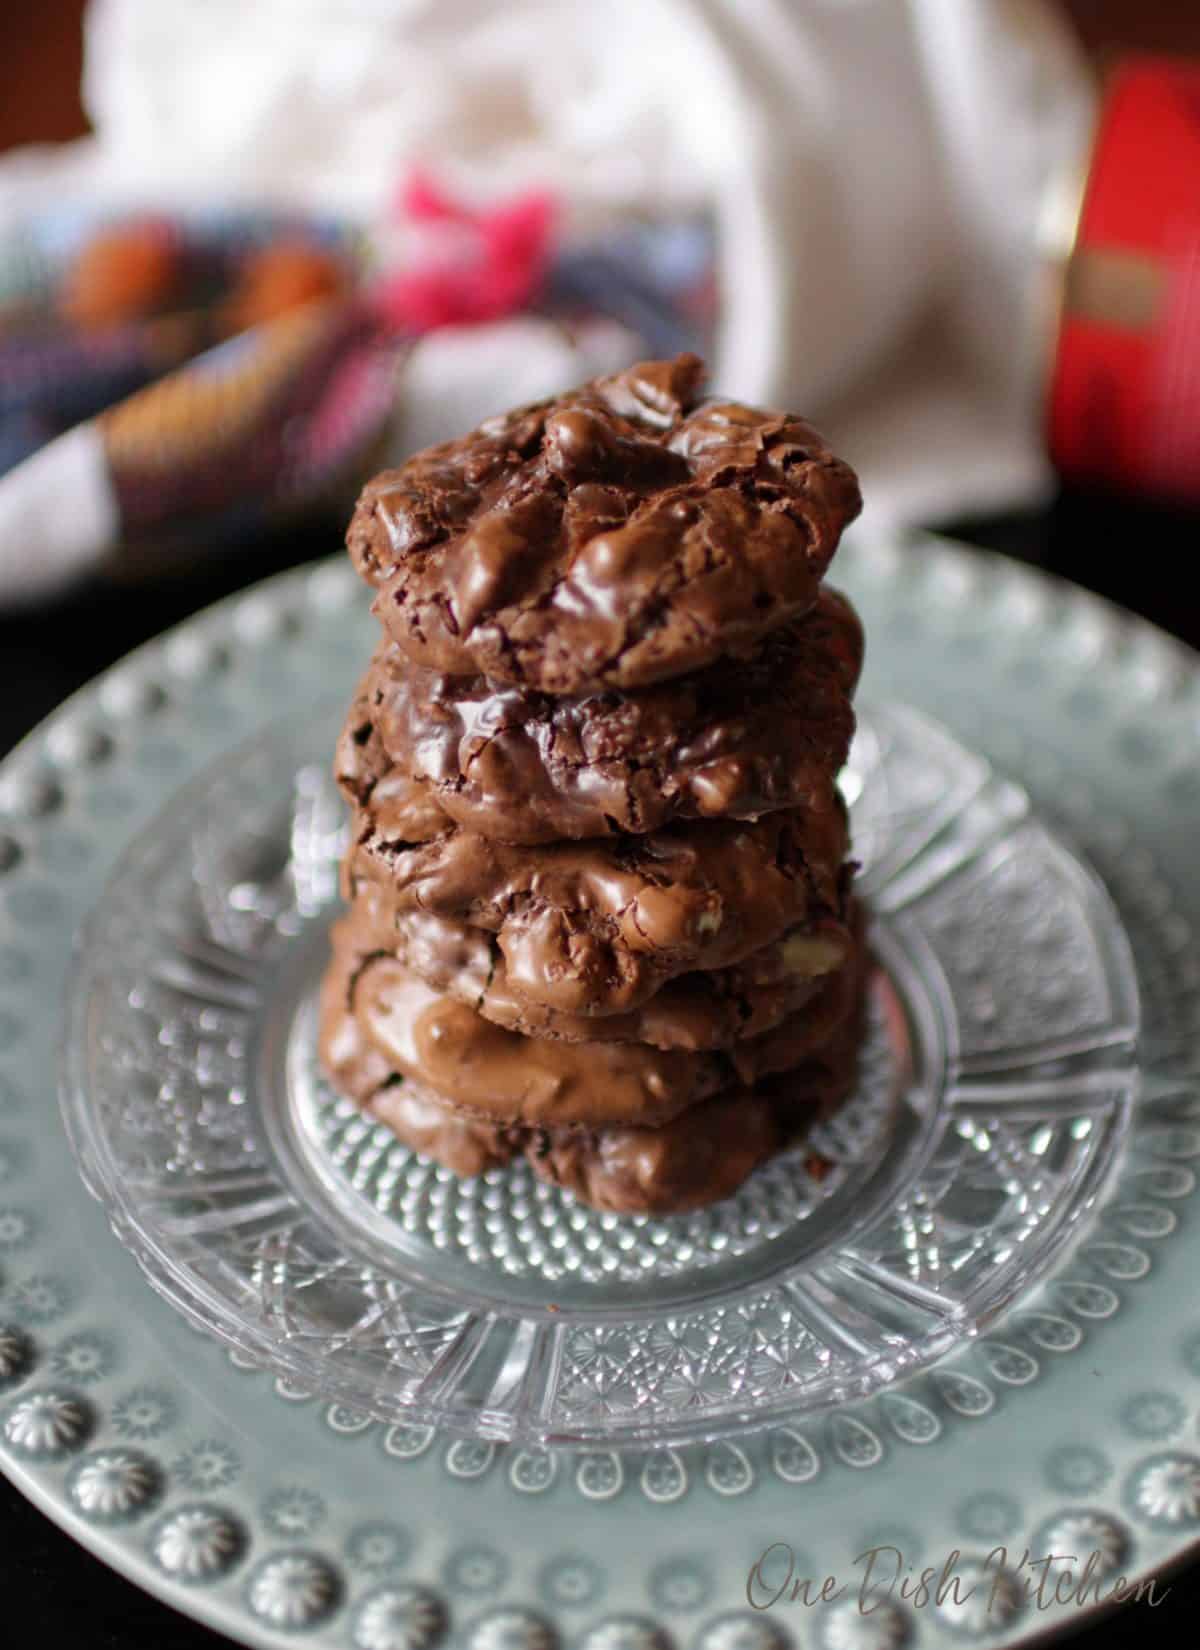 Six flourless chocolate cookies stacked on top of each other on a plate